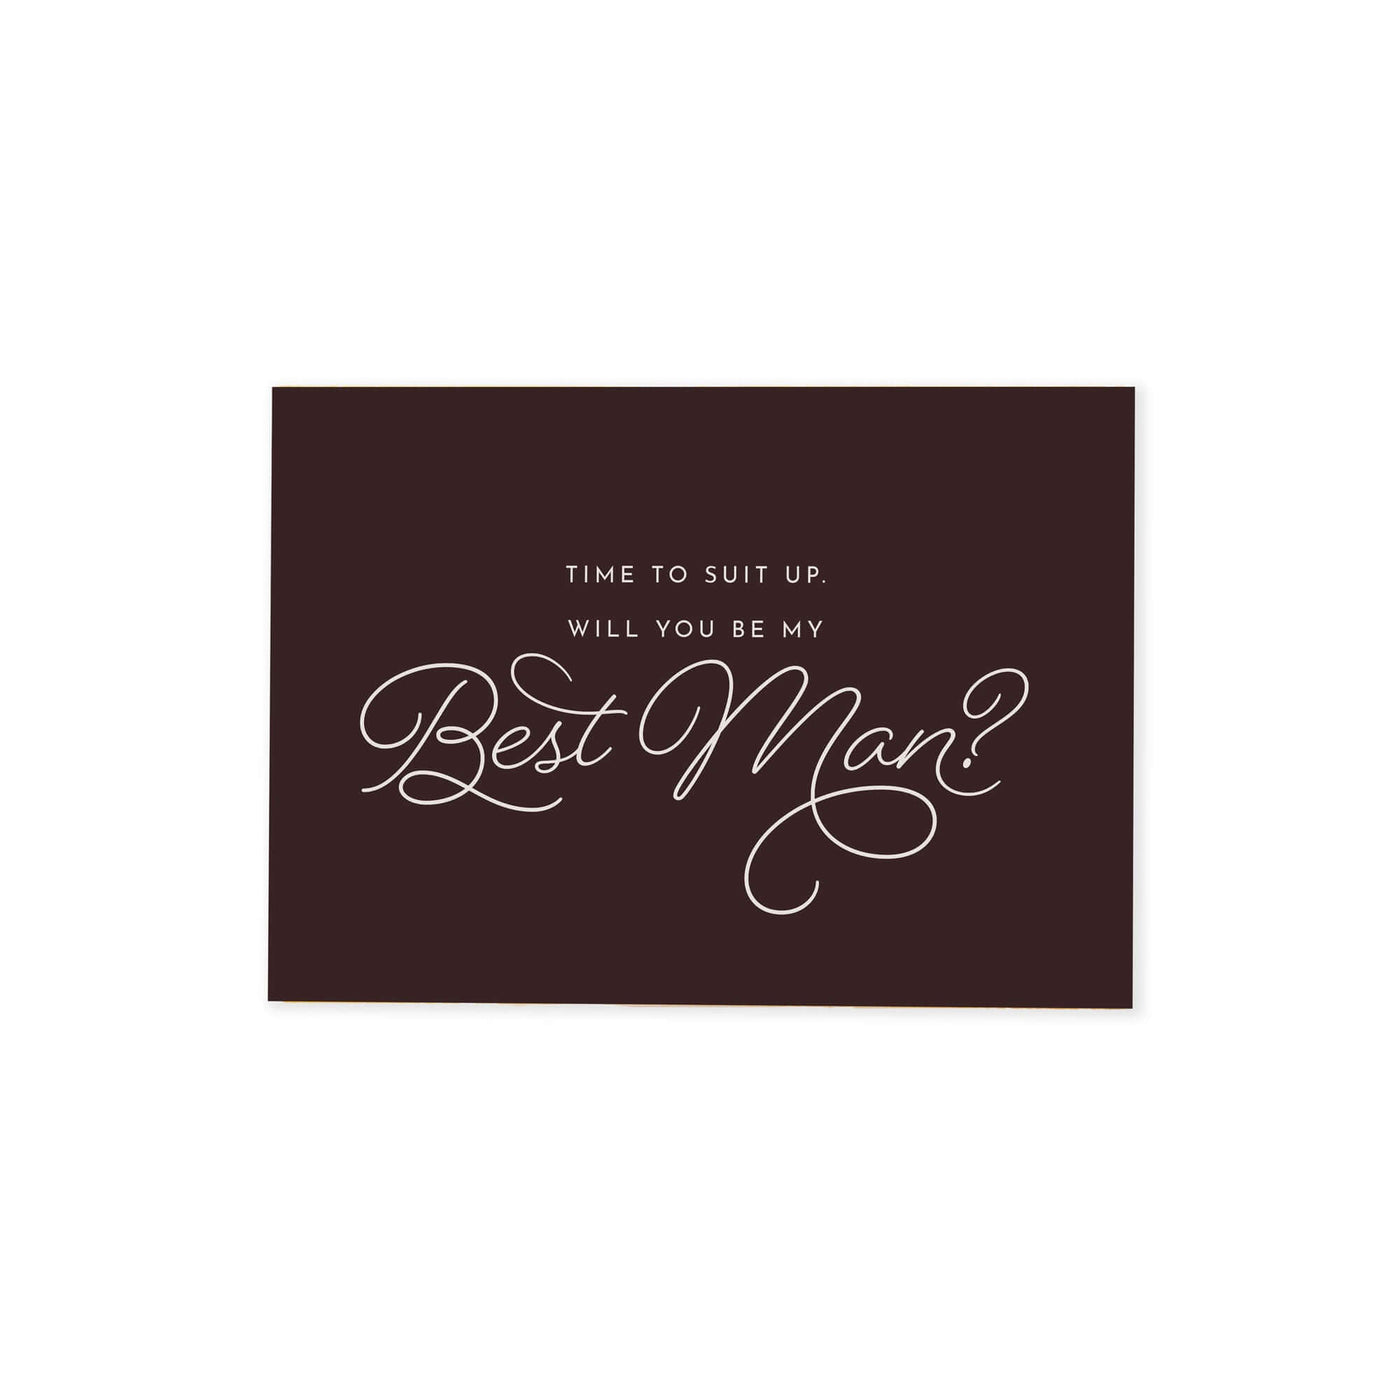 dark brown Be my best man proposal card that reads "Time to suit up. Will you be my best man?" in white cursive font